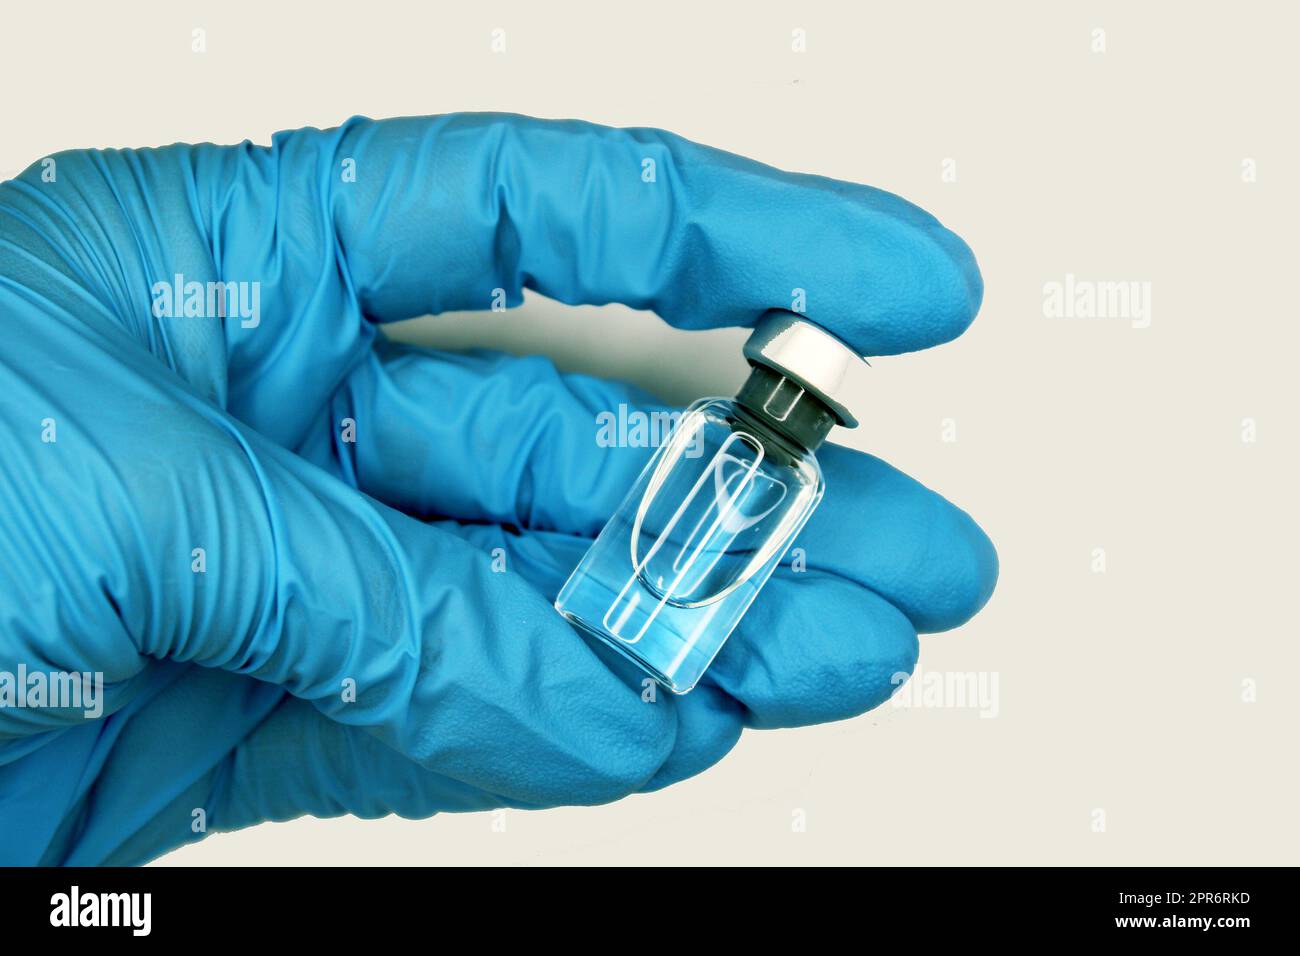 A hand in a blue medical glove close-up holding a vaccine against a light background. The concept of the fight against Covid19. Stock Photo